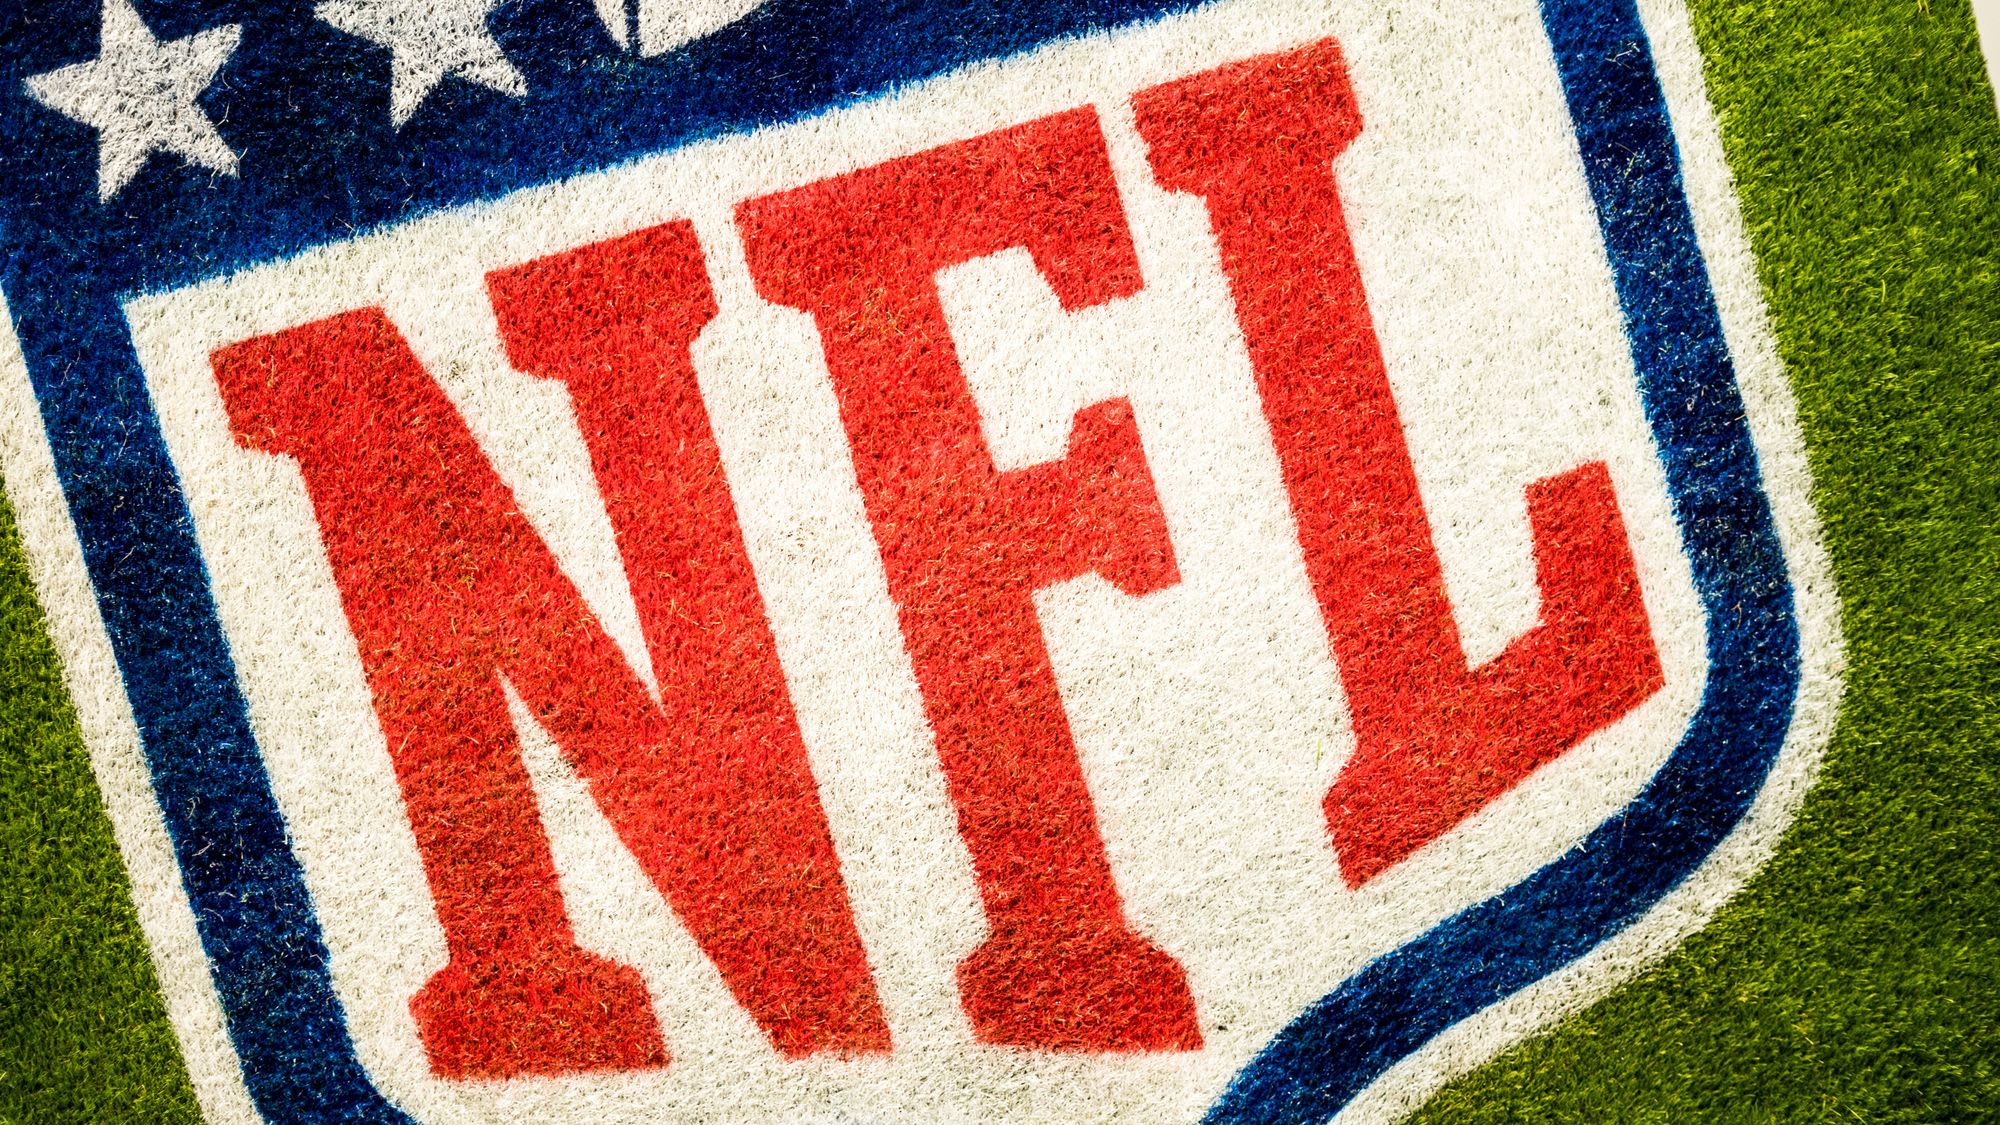 NFL games today: Schedule, channel, live stream options